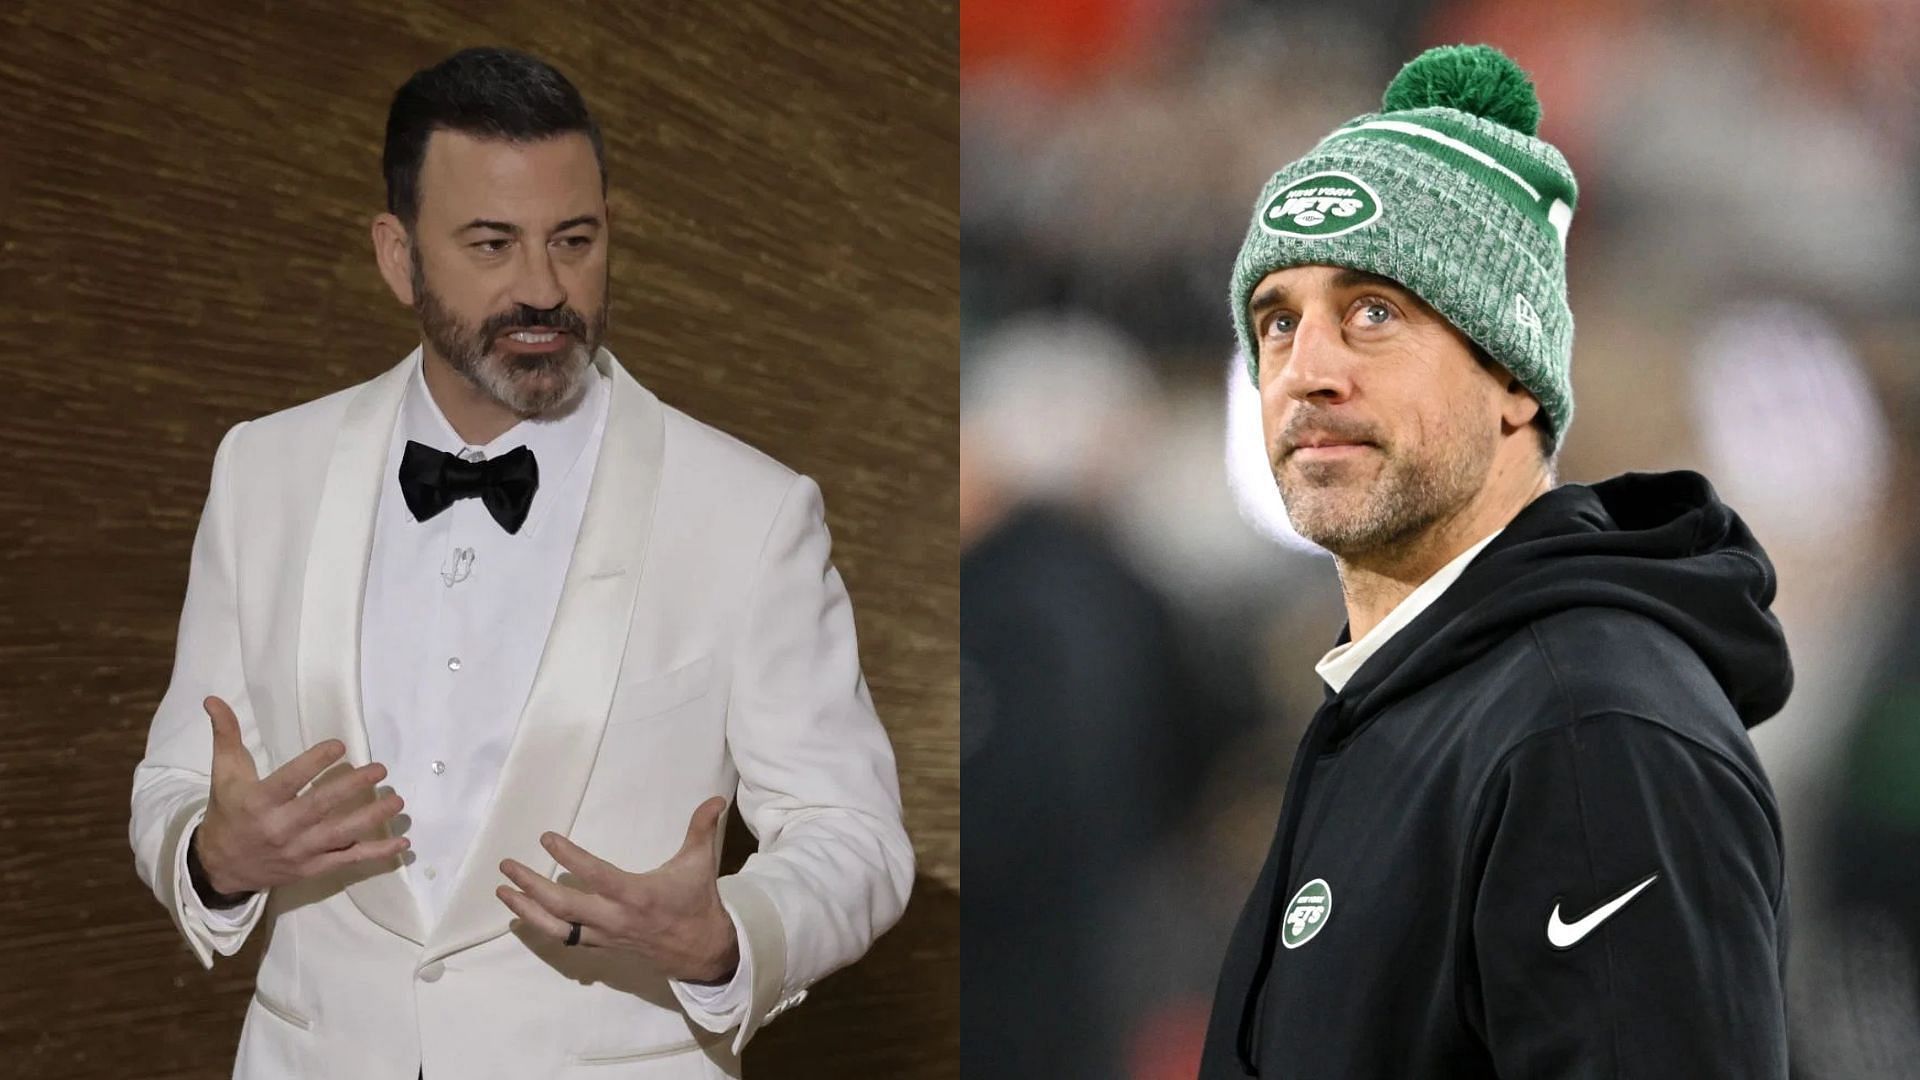 Jimmy Kimmel calls on Aaron Rodgers to apologize